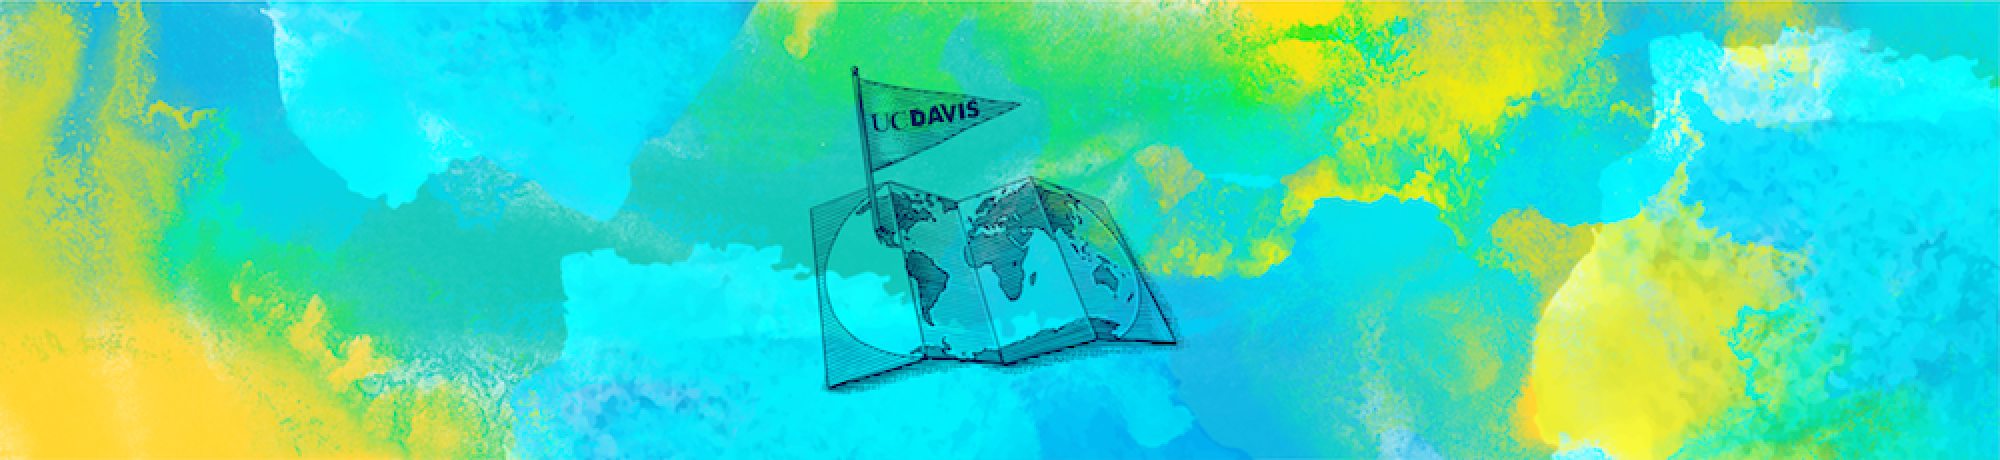 Watercolor background with UC Davis map